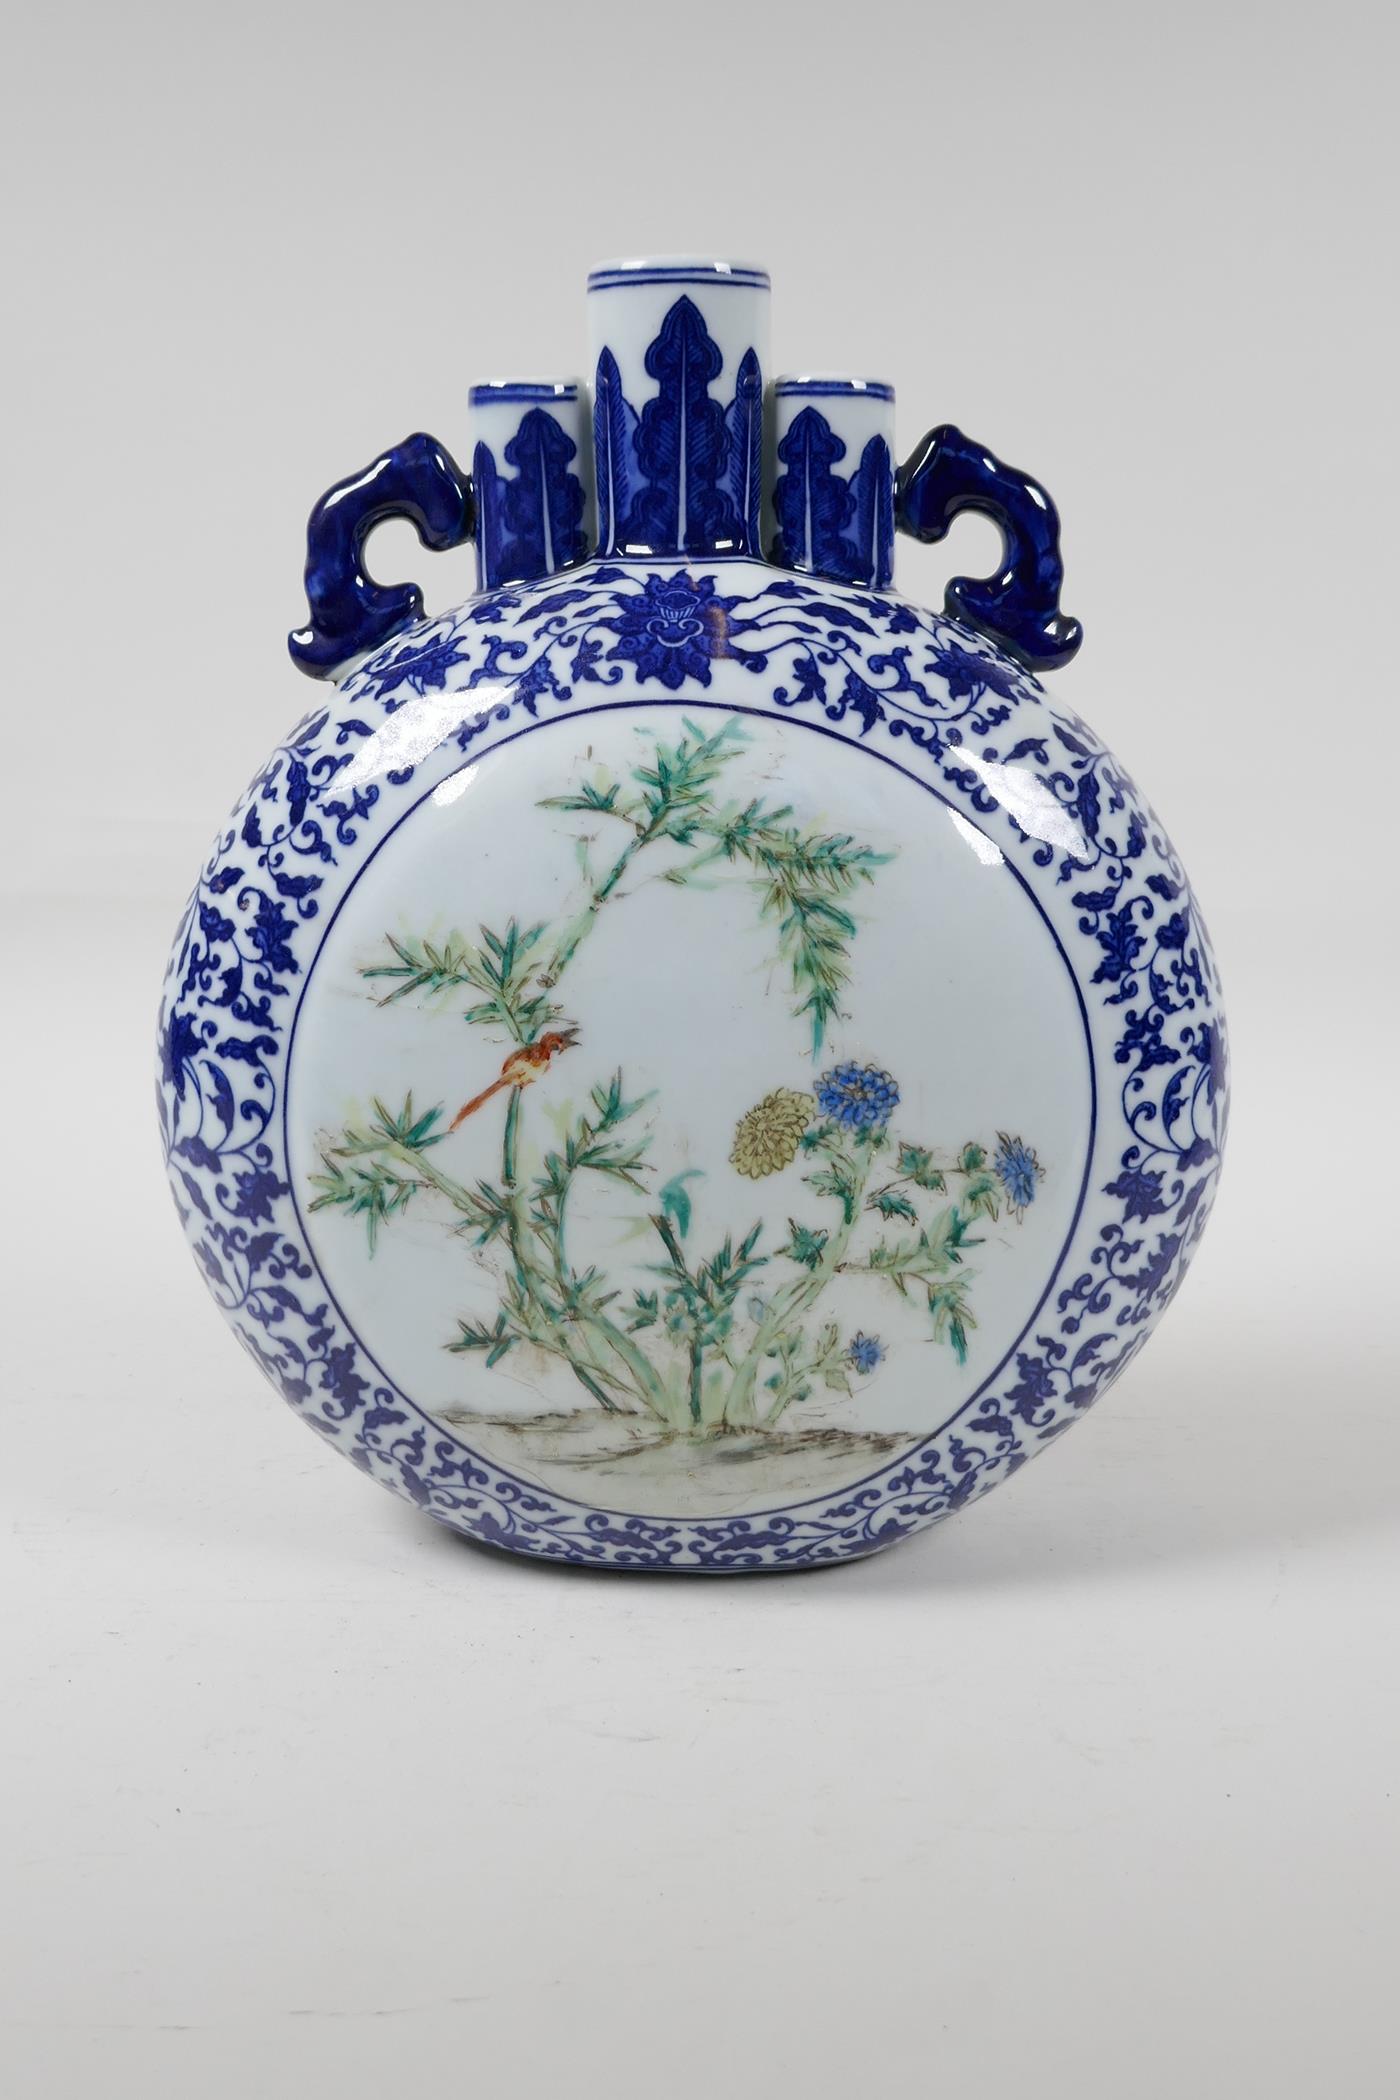 A Chinese blue and white porcelain triple stem moon flask with polychrome panels depicting a - Image 4 of 7